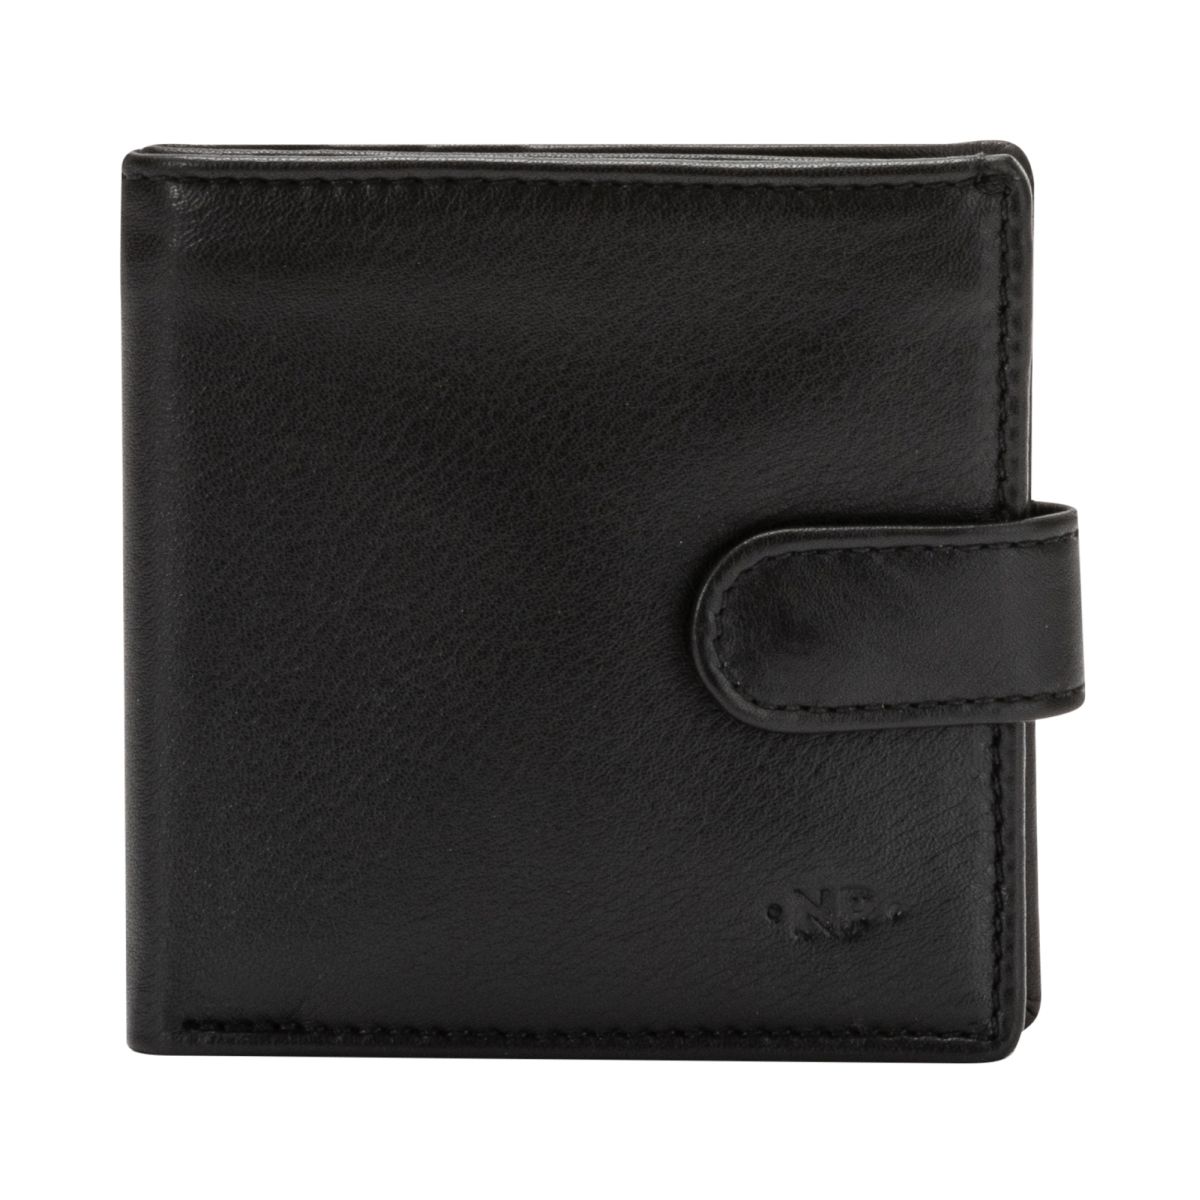 Small mens wallet with coin pocket - Black